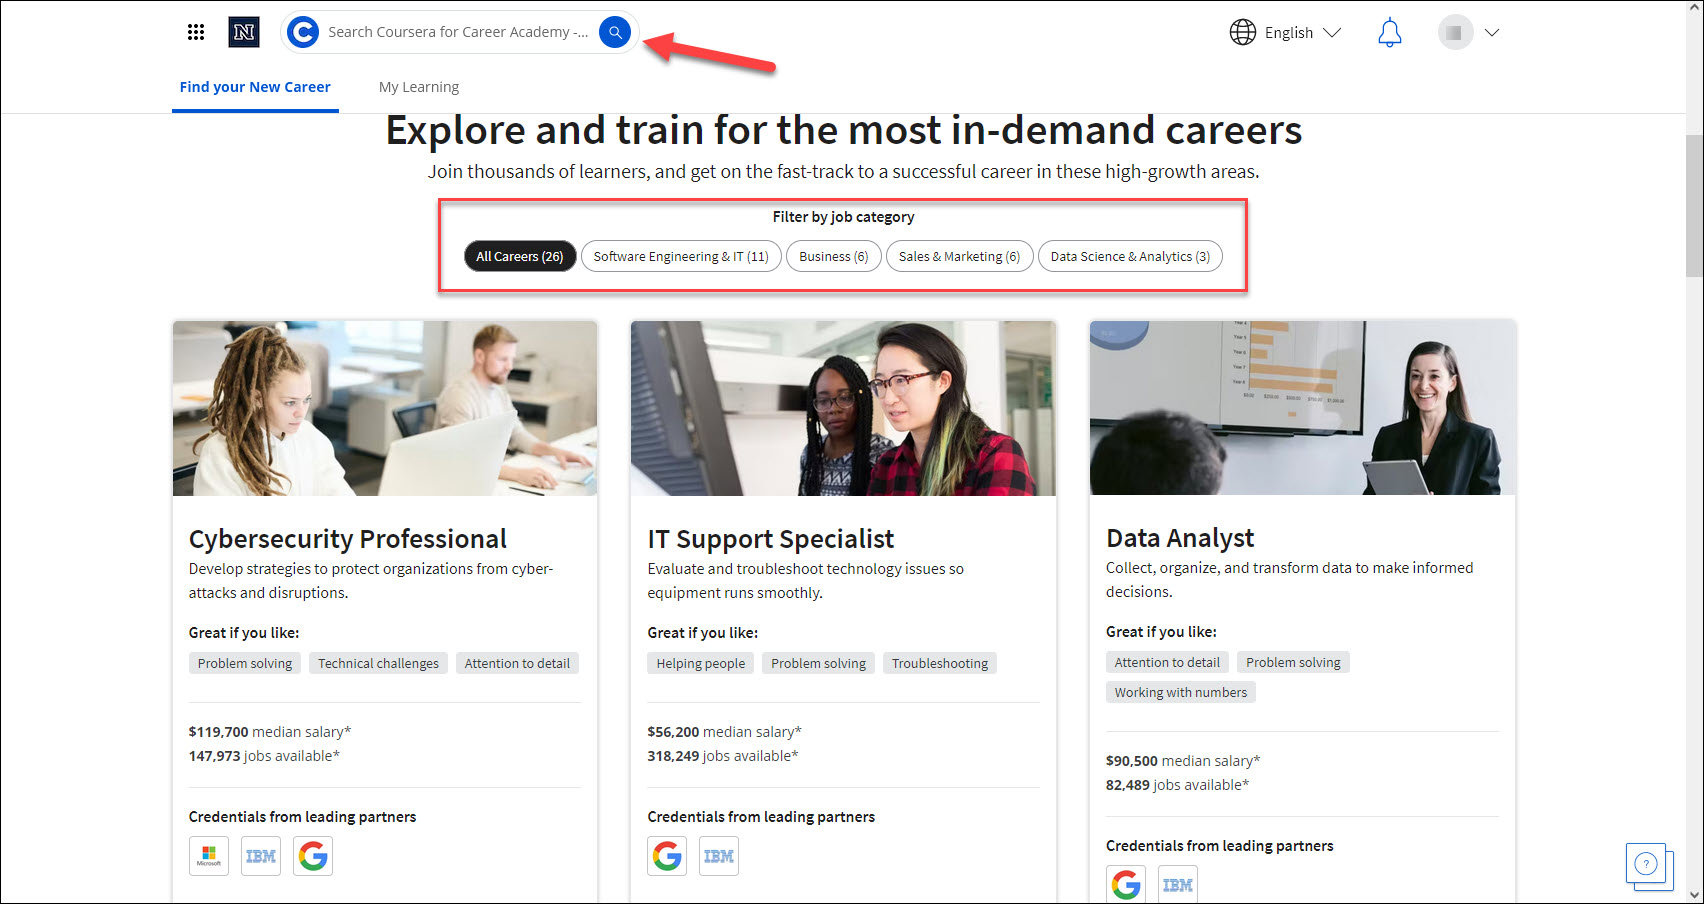 Screen shot of UNR Coursera Career Academy – Faculty & Staff home page, shown after login, with default program credentials shown. There is a box around the Job Category filter to highlight the various filter options. An arrow highlights the main search tool.